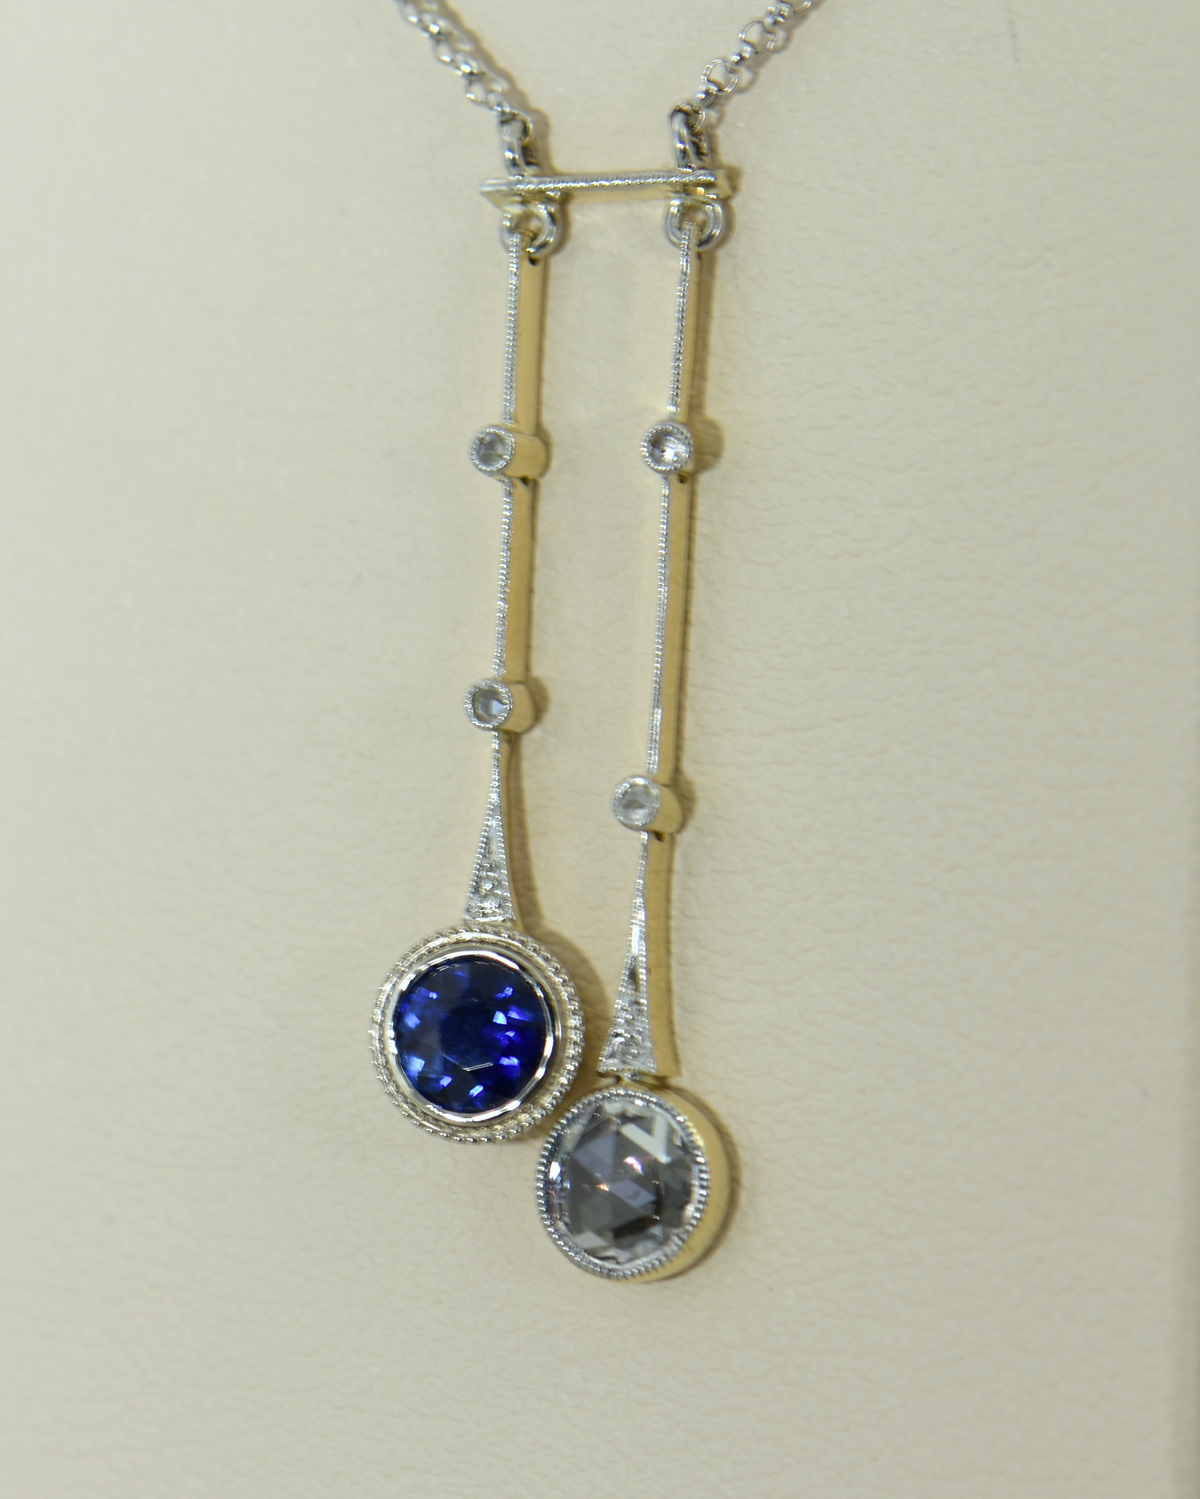 Negligee Necklace with Blue Sapphire & Rose Cut Diamonds | Exquisite ...